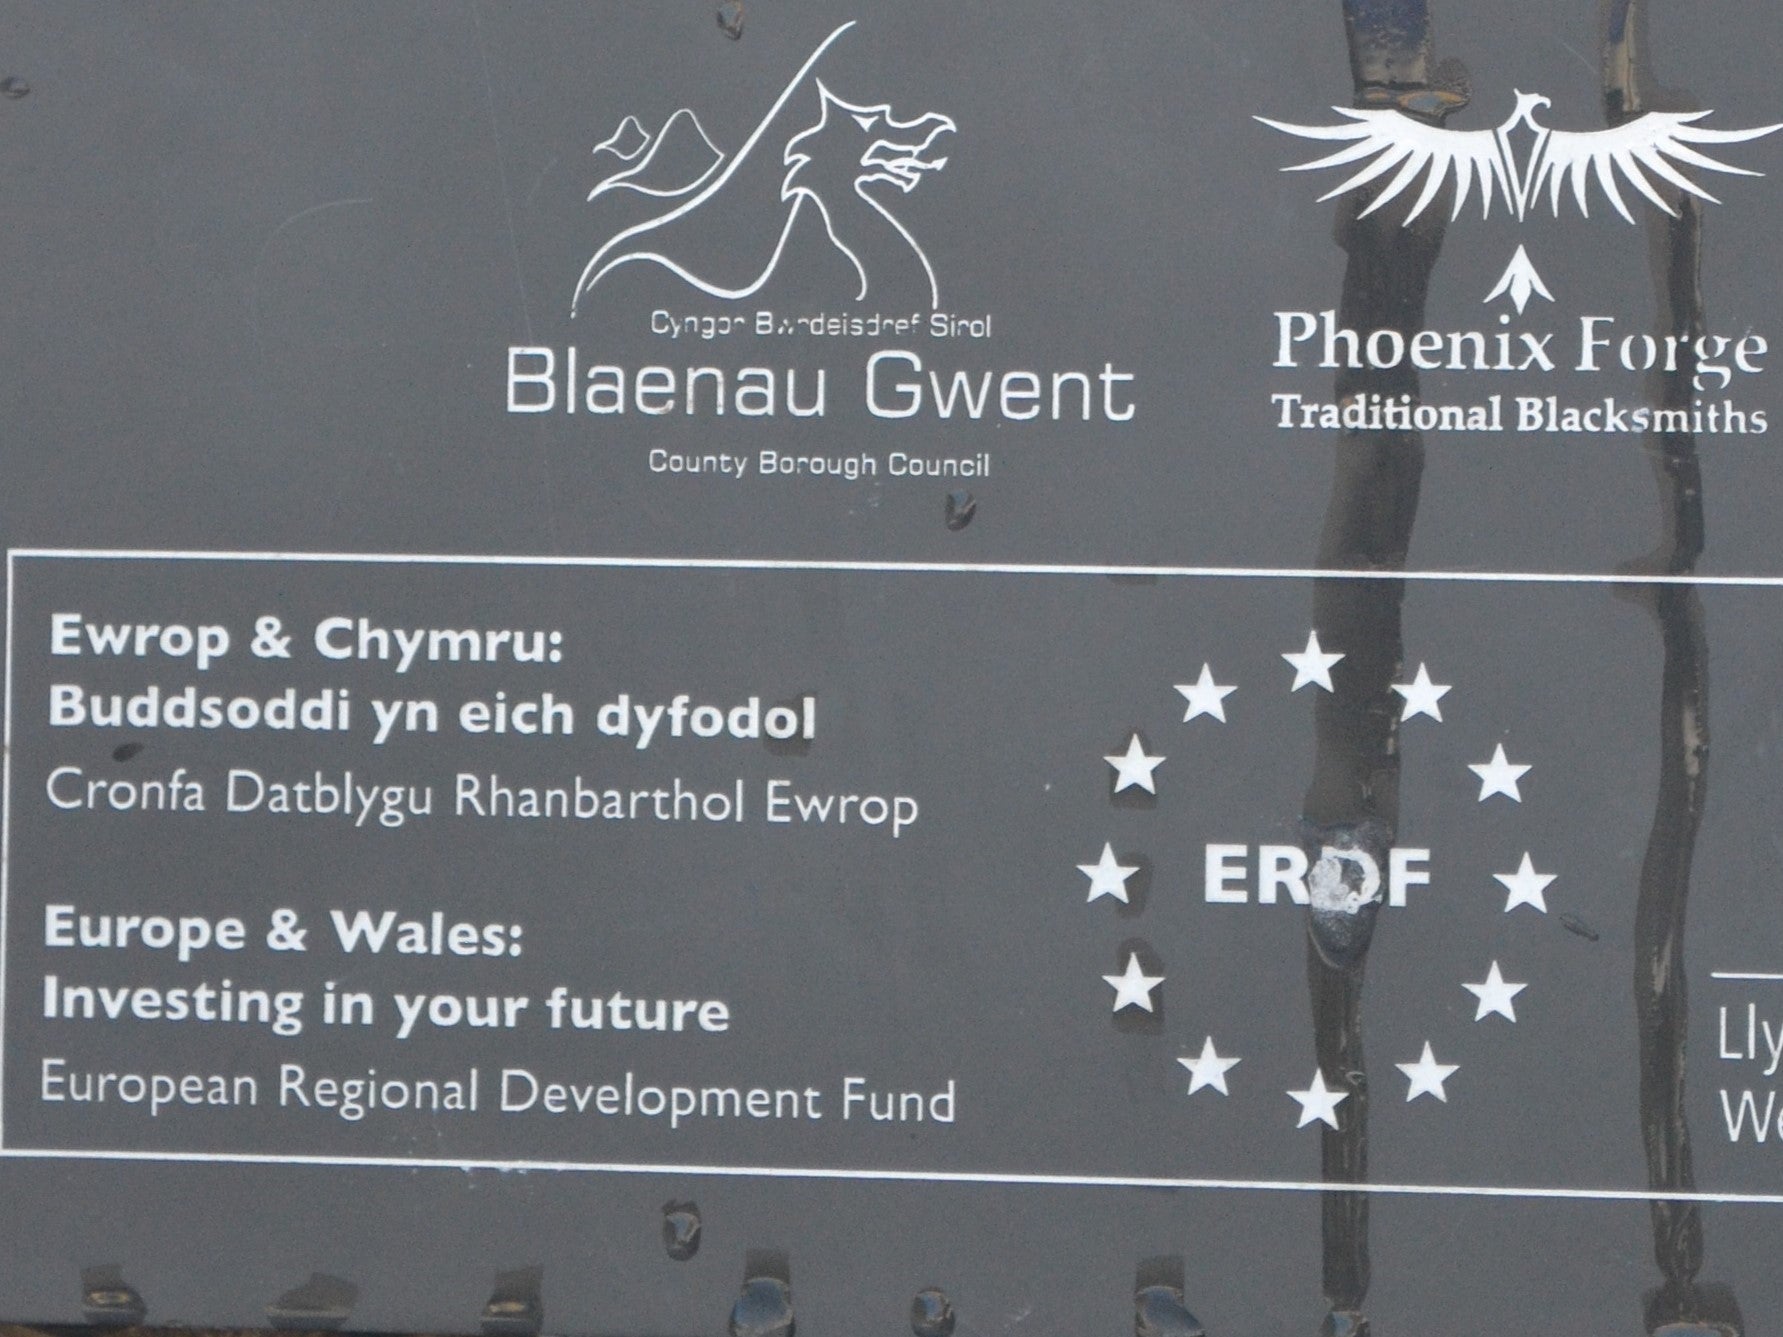 Blaenau Gwent is now peppered with signs boasting of EU investment